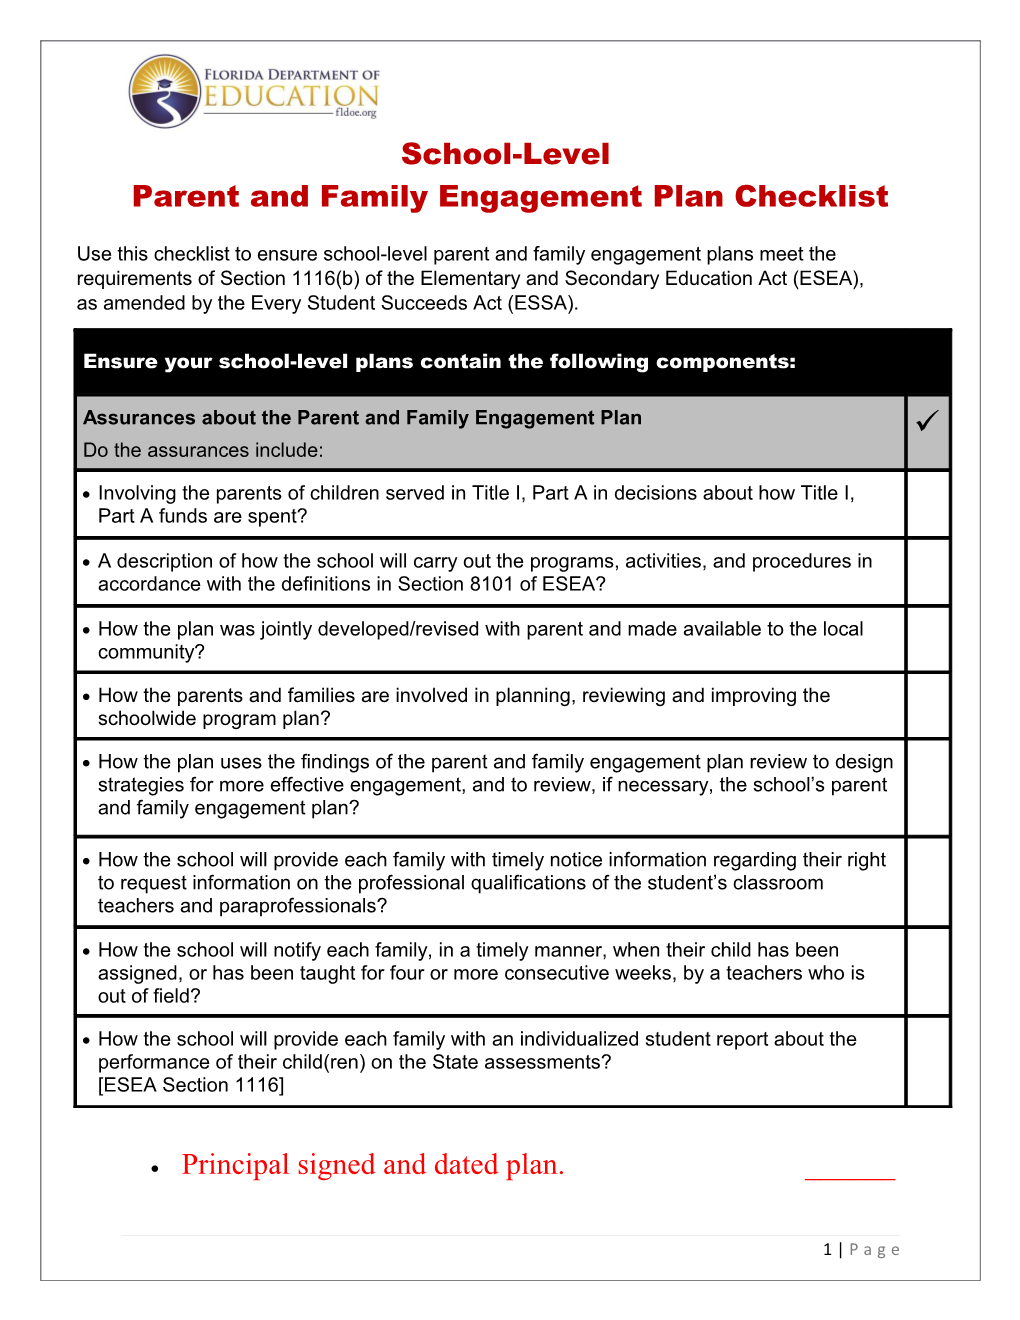 Parent and Family Engagement Plan Checklist